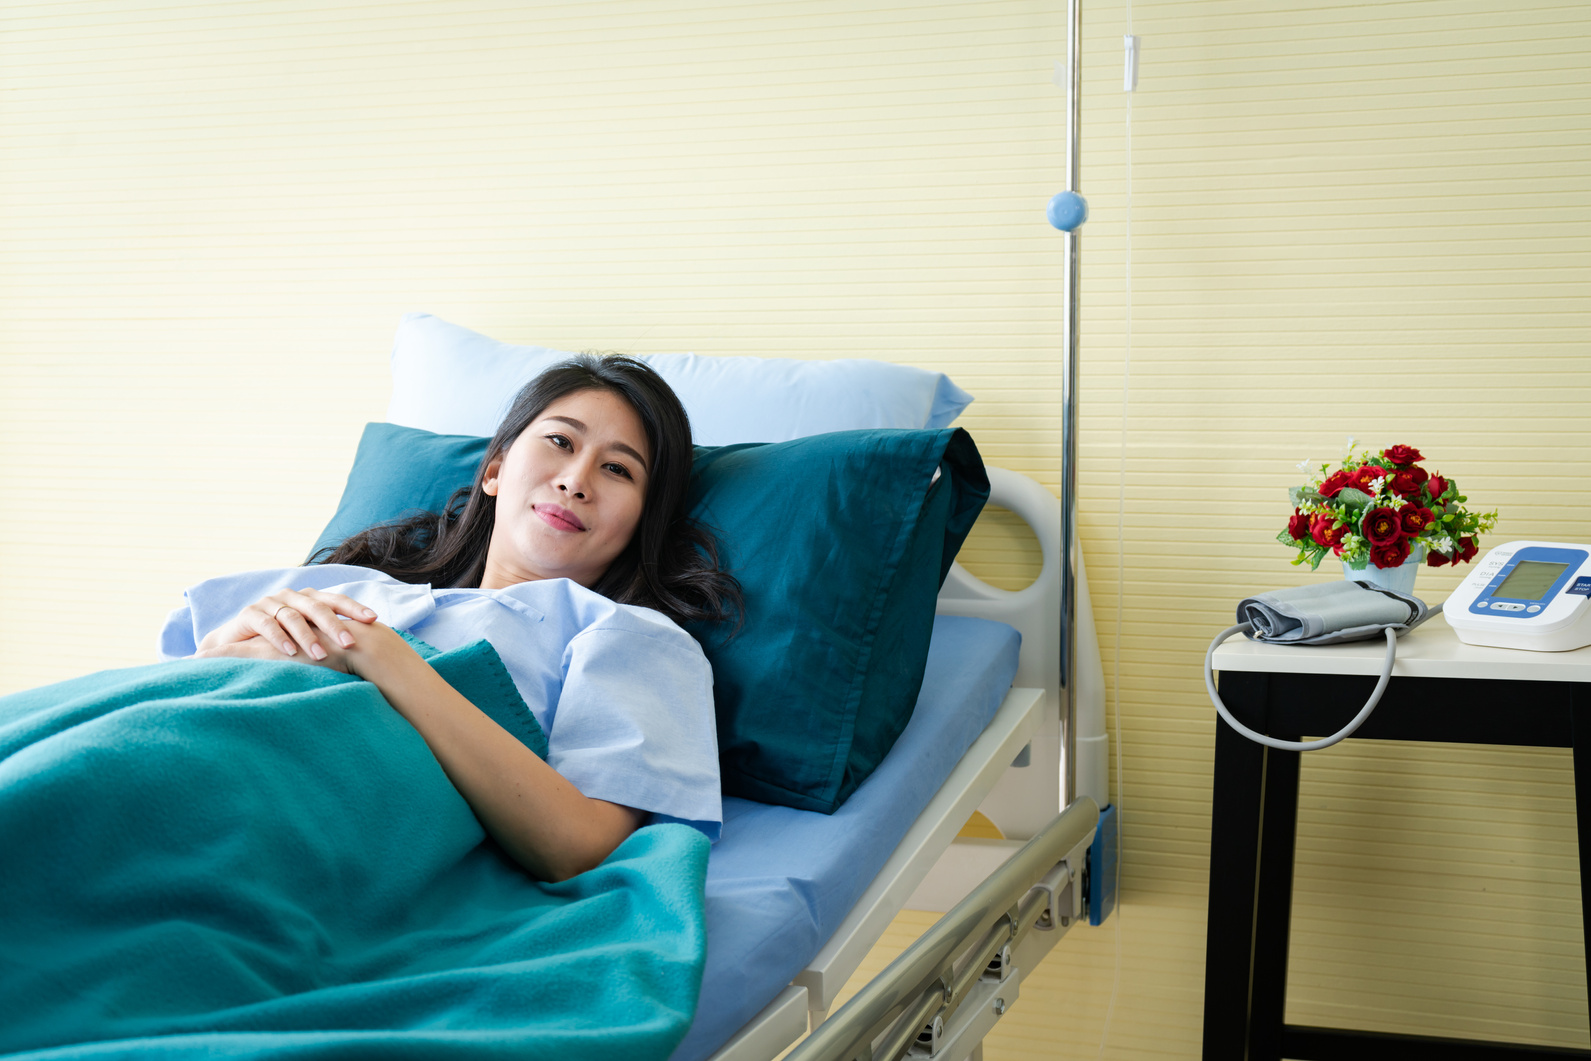 Smiling female patient in bed